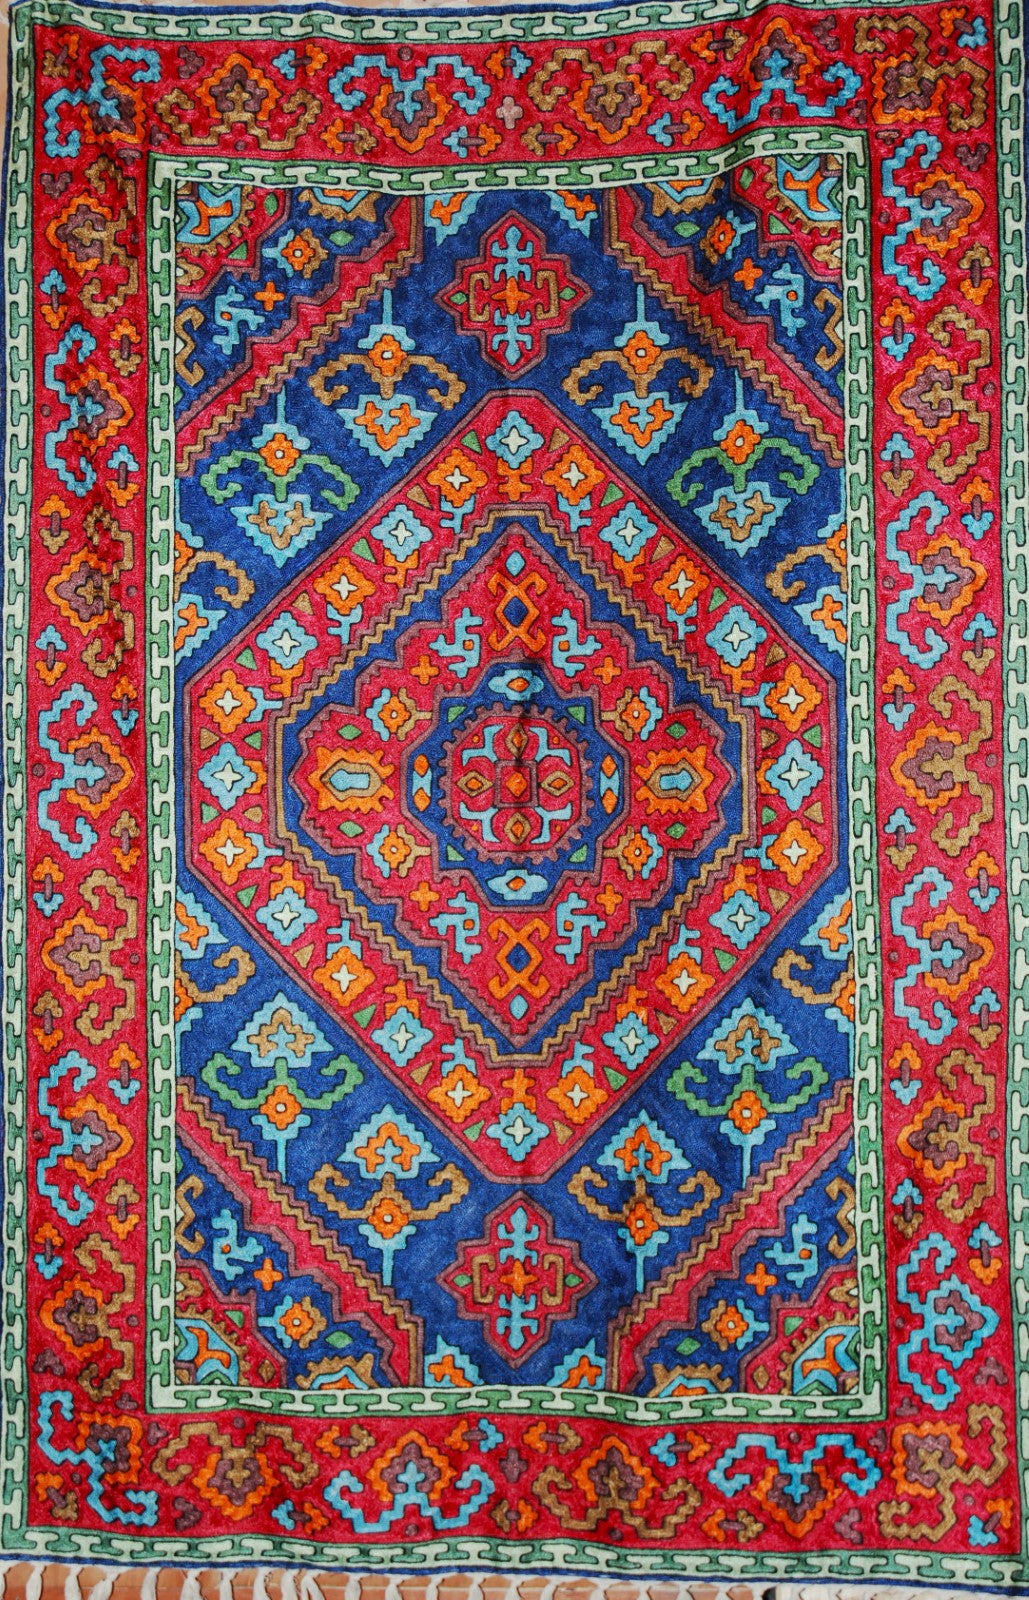 ChainStitch Tapestry Silk Wall Hanging Area Rug, Multicolor Embroidery 6x4 feet #CWR24202